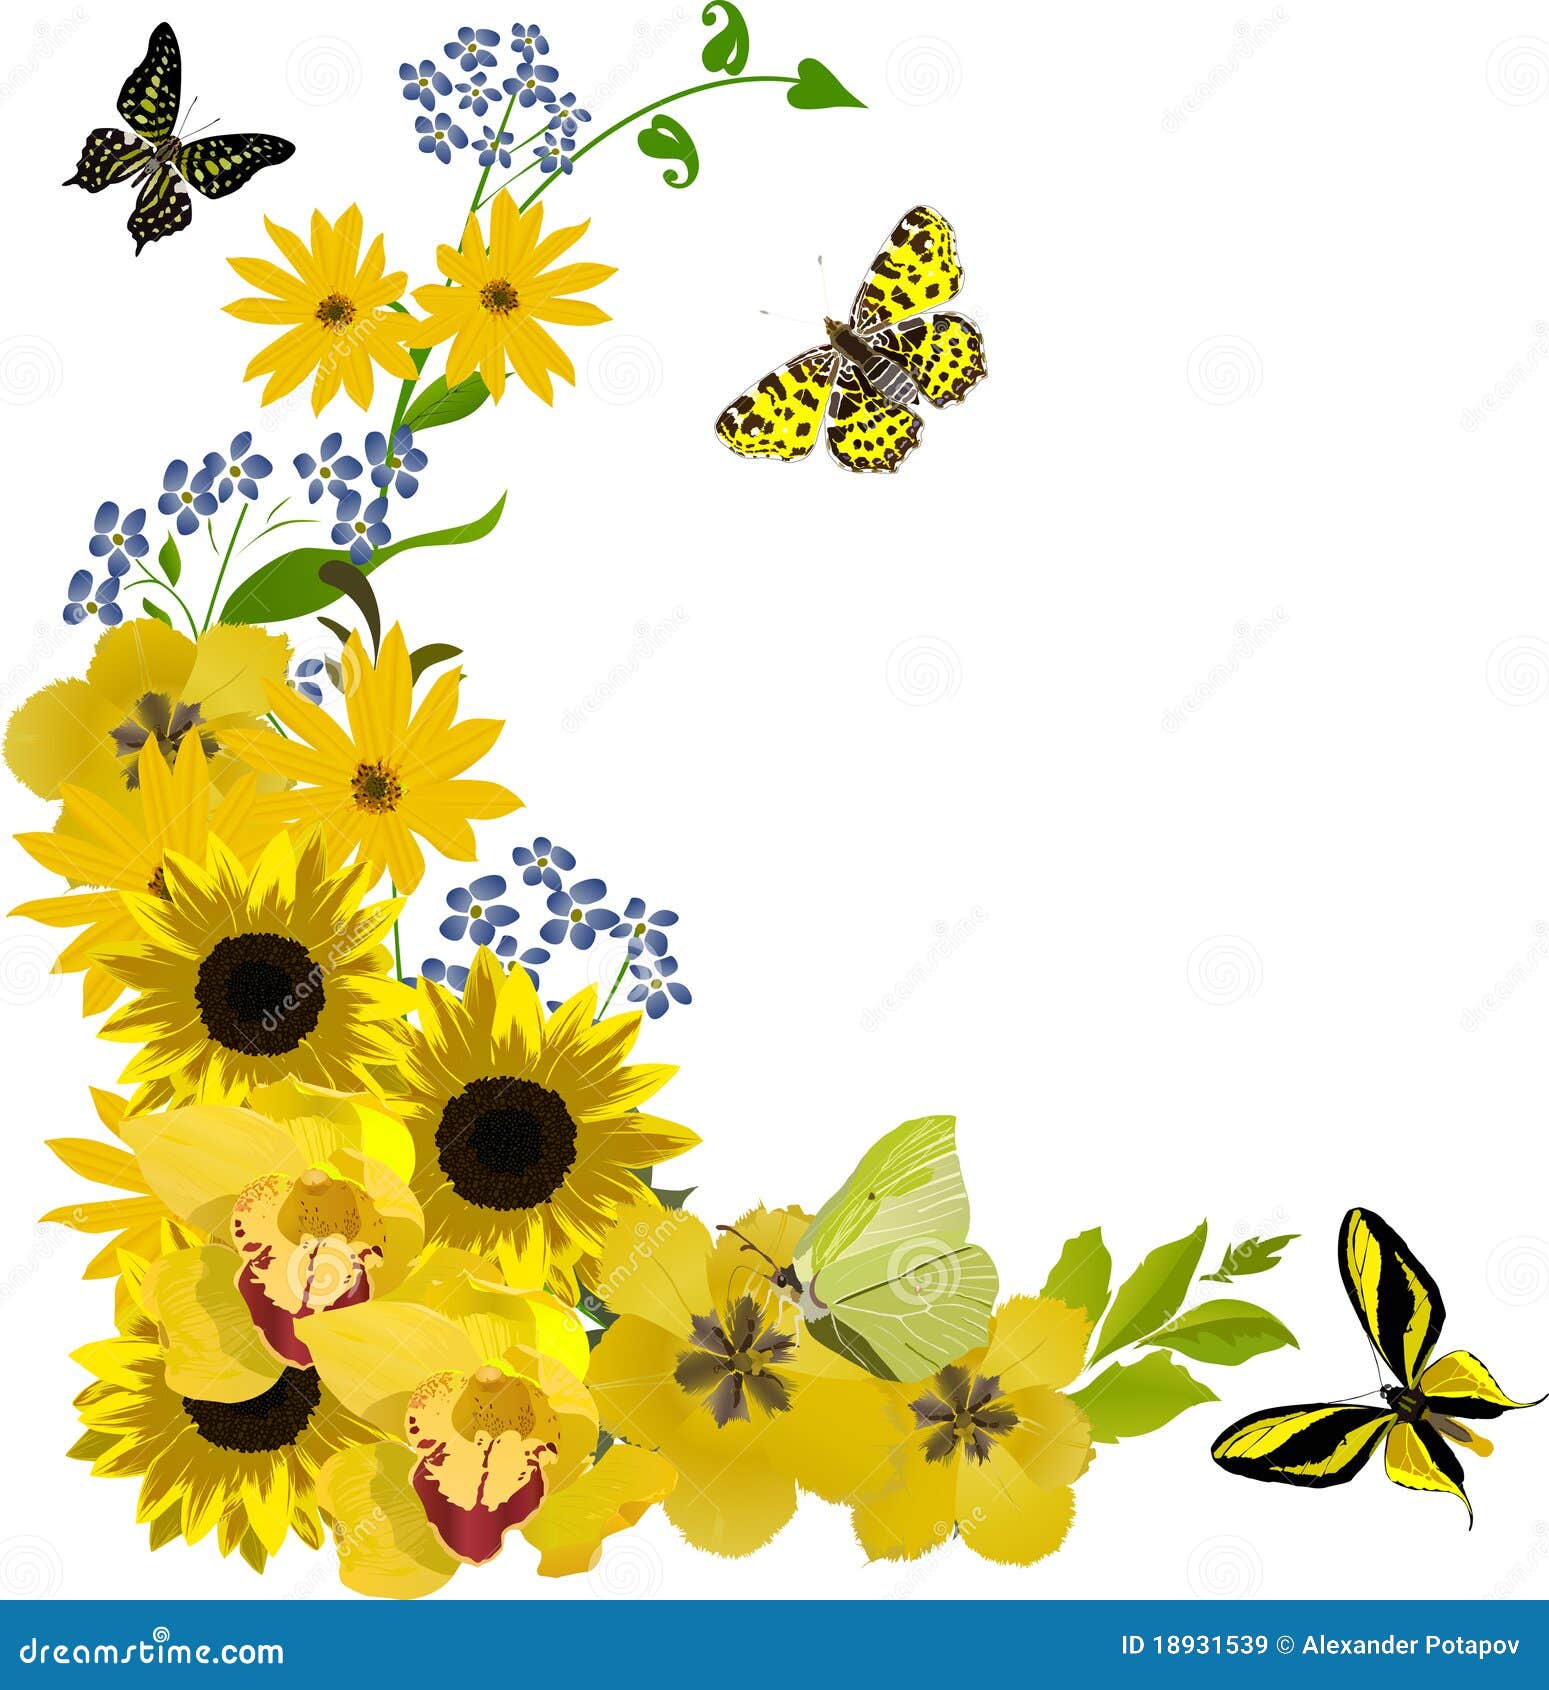 Download Pattern With Yellow Sunflowers And Butterflies Stock ...